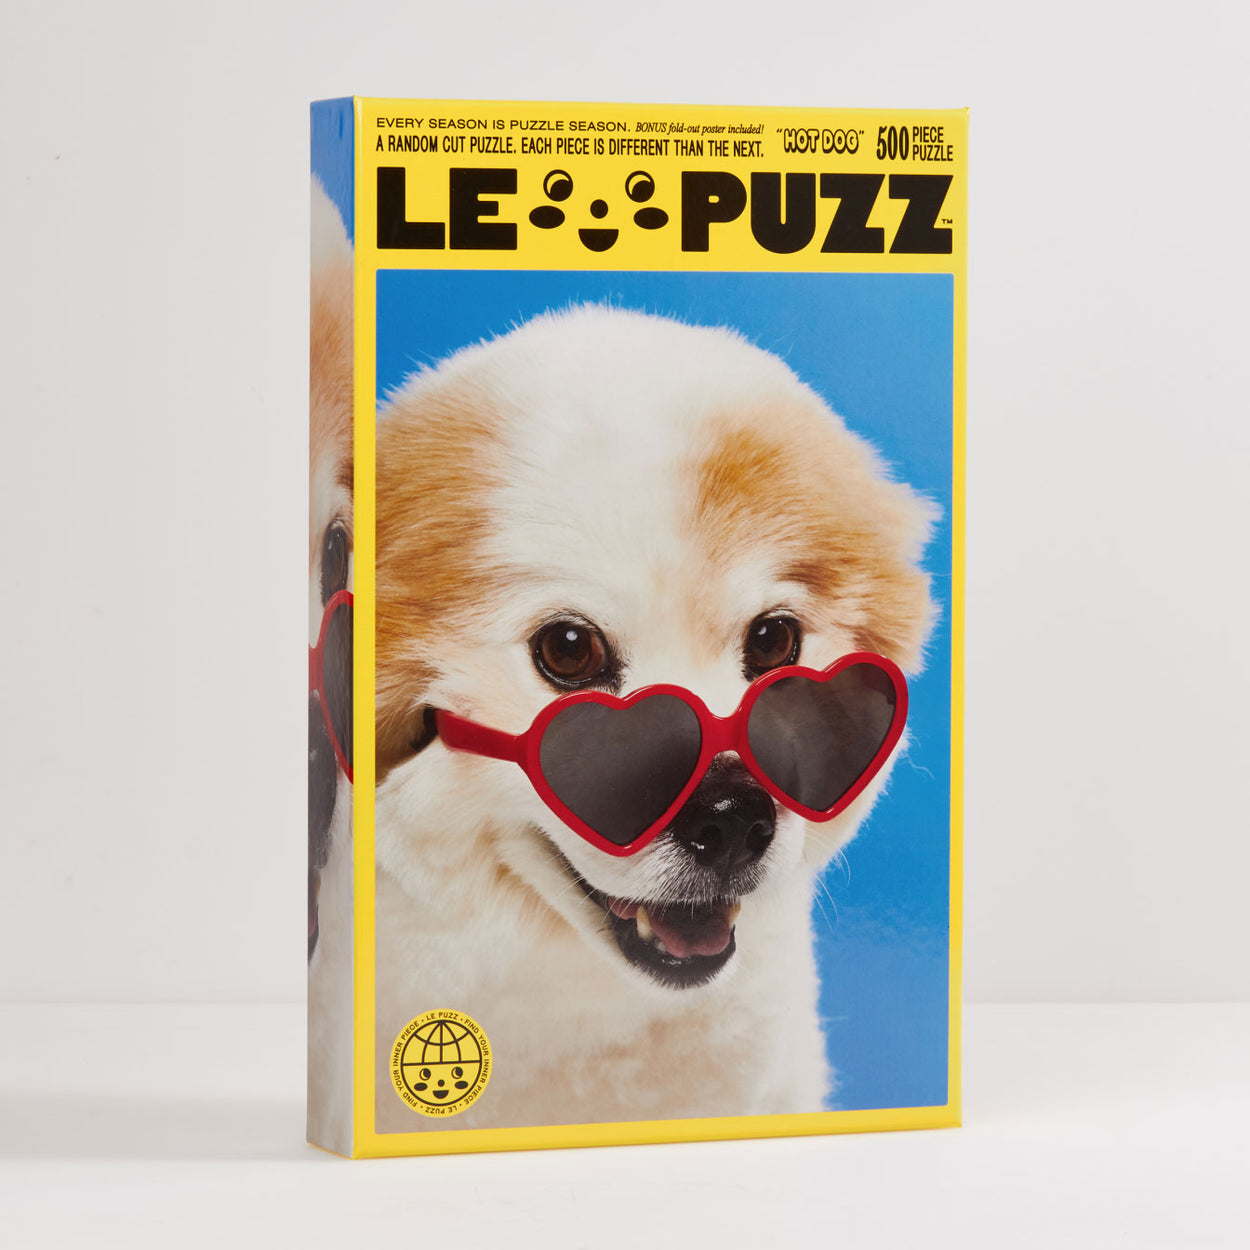 Hot Dog Puzzle | Le Puzz | 500 Pieces: Cream Fluffy Dog with Heart Sunglasses Puzzle. Hot Dog features our furry fwend Bucky! When we met Bucky we knew he’d make a perfect puzzle pal. He stole our hearts with his teeny grin and heart shaped sunglasses.